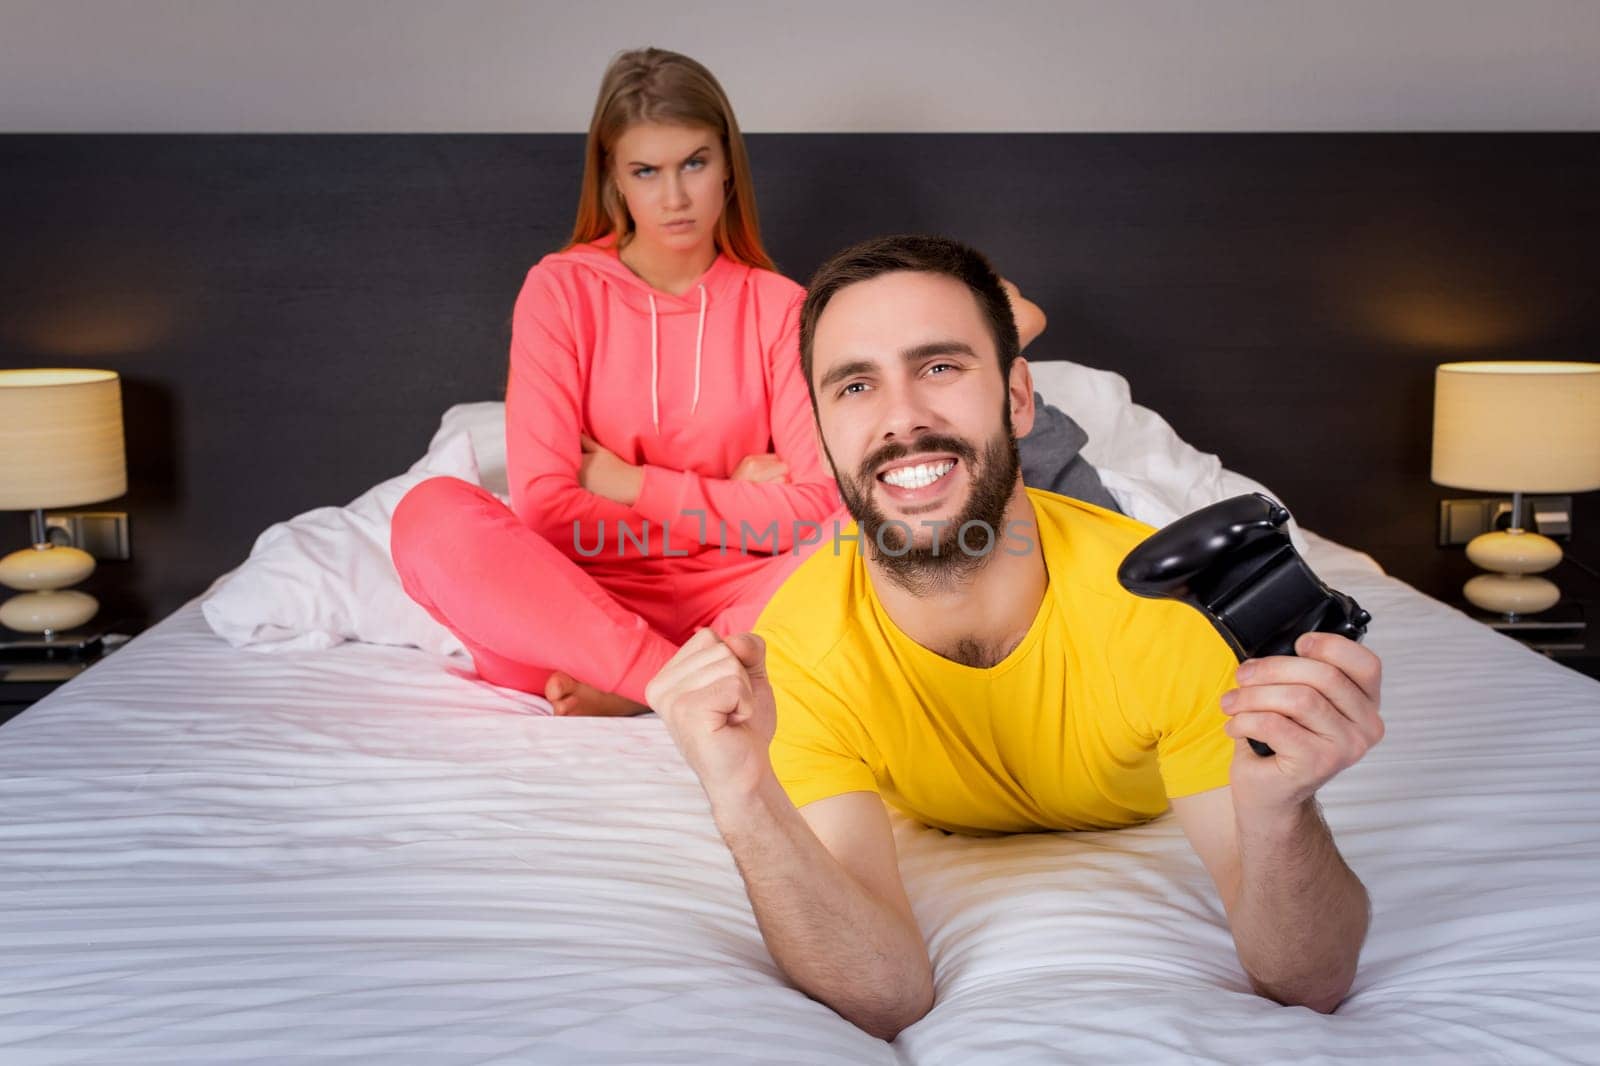 Young couple having playing videogames in bed. Man playing video game, upset woman on background.